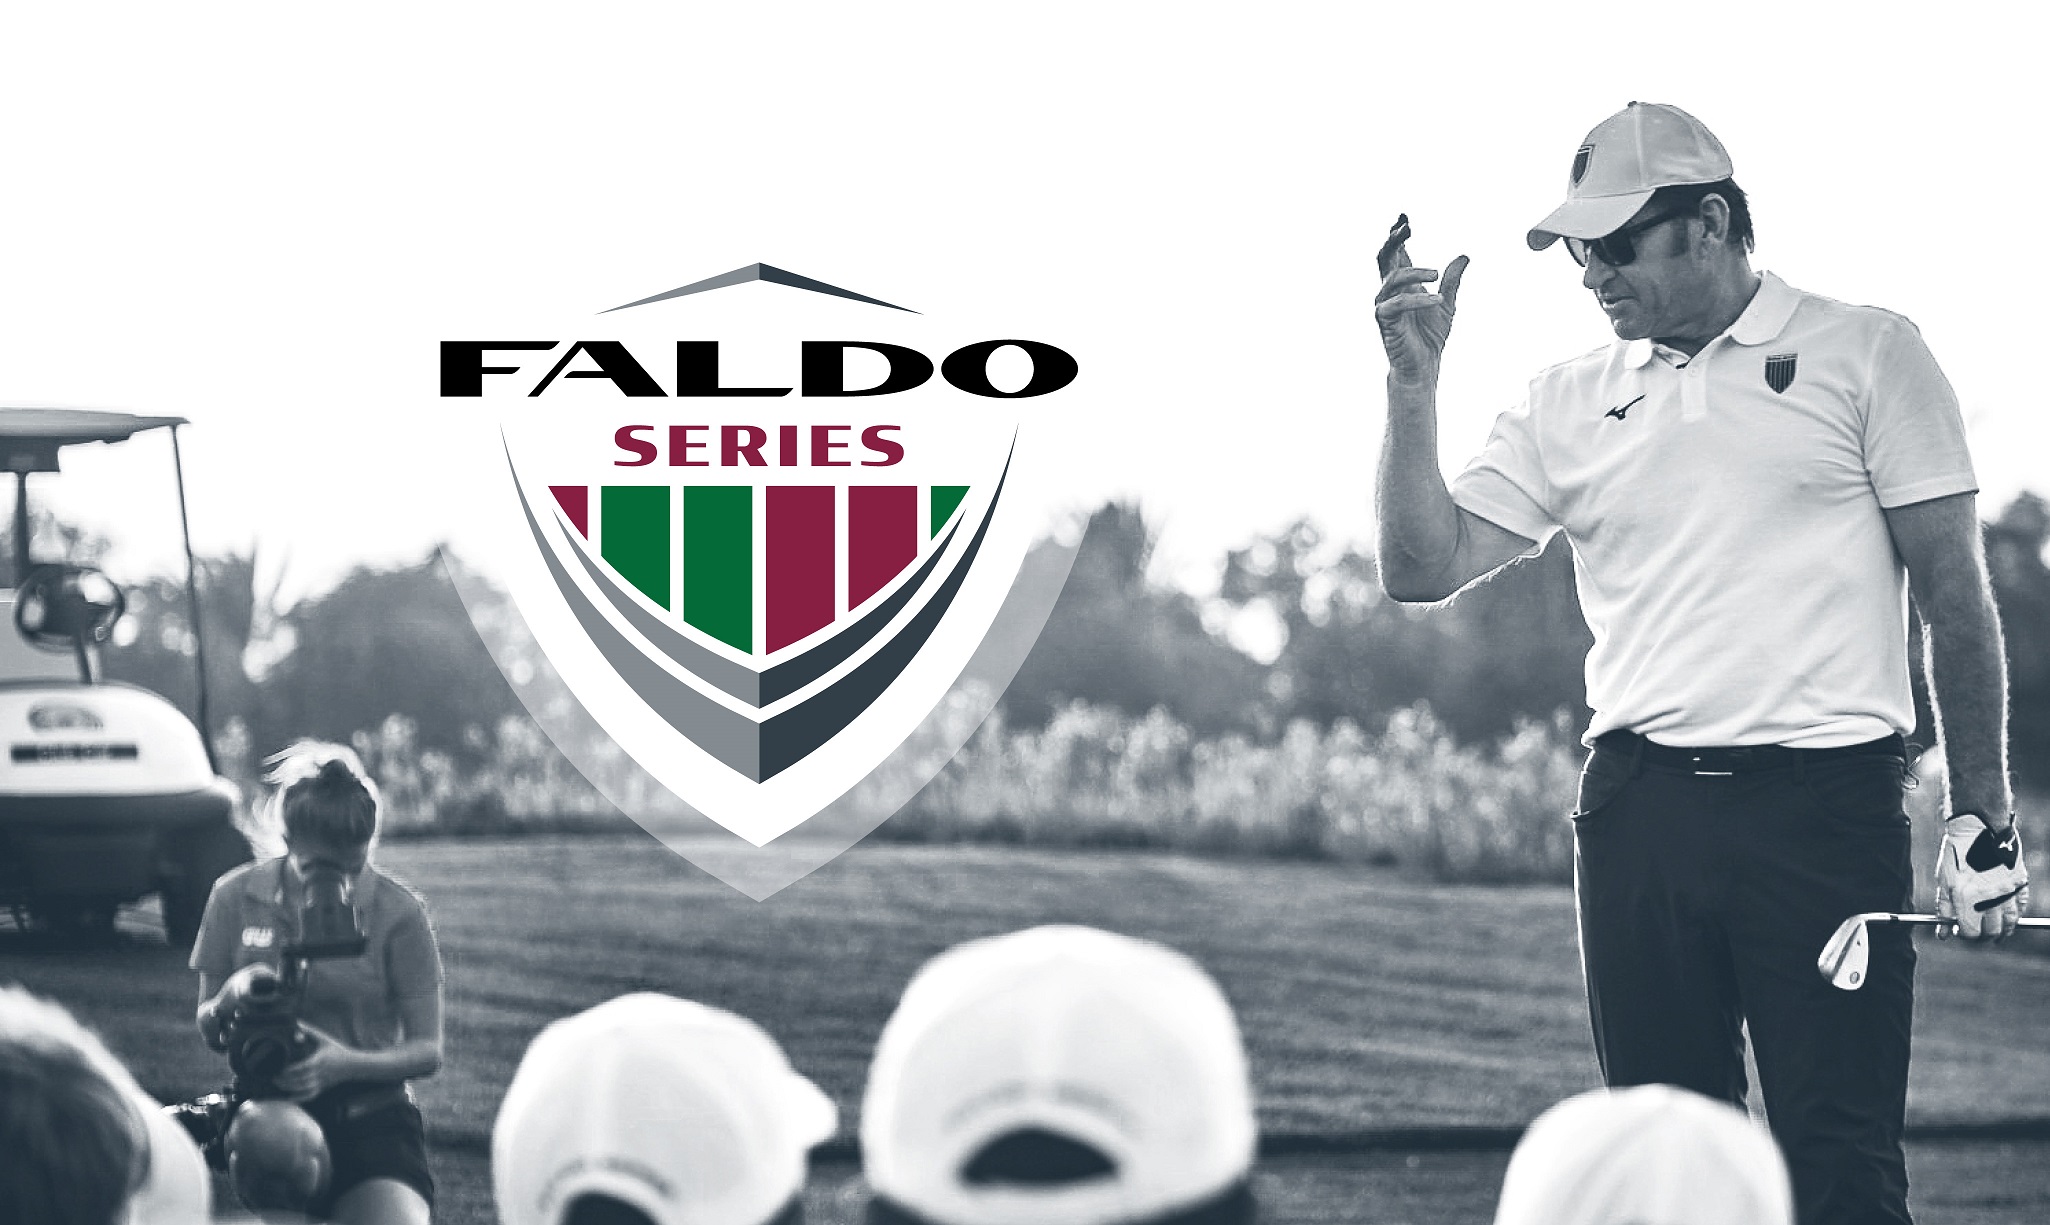 Faldo Series Asia 20-21 s slated to tee-off in Thailand this month